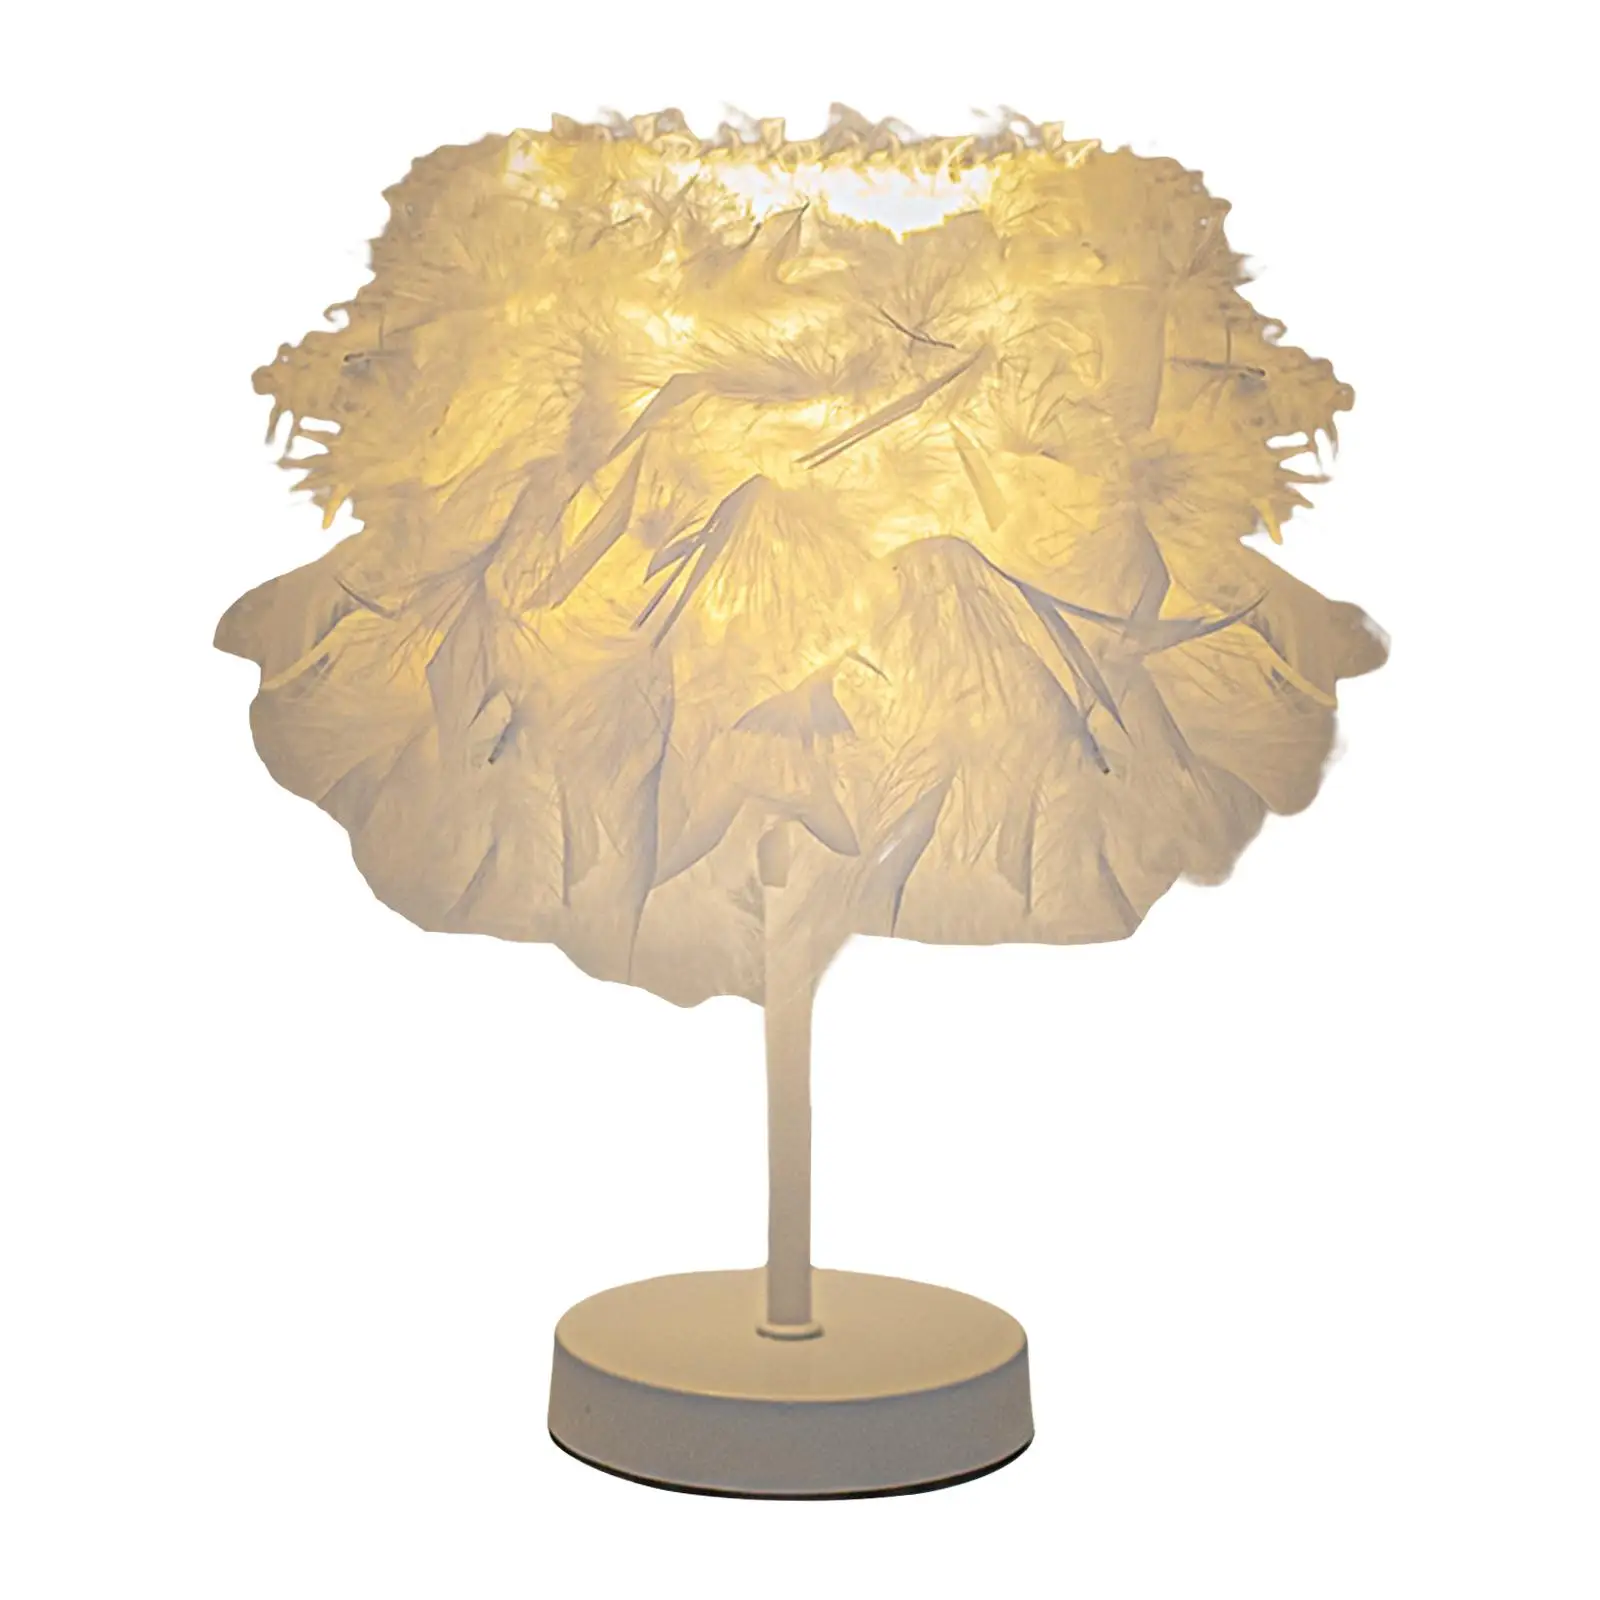 Modern Desk Light Decorative Lighting Fixture Lantern Feathers Table Lamp for Dining Room Home NightStand Bedside Wedding